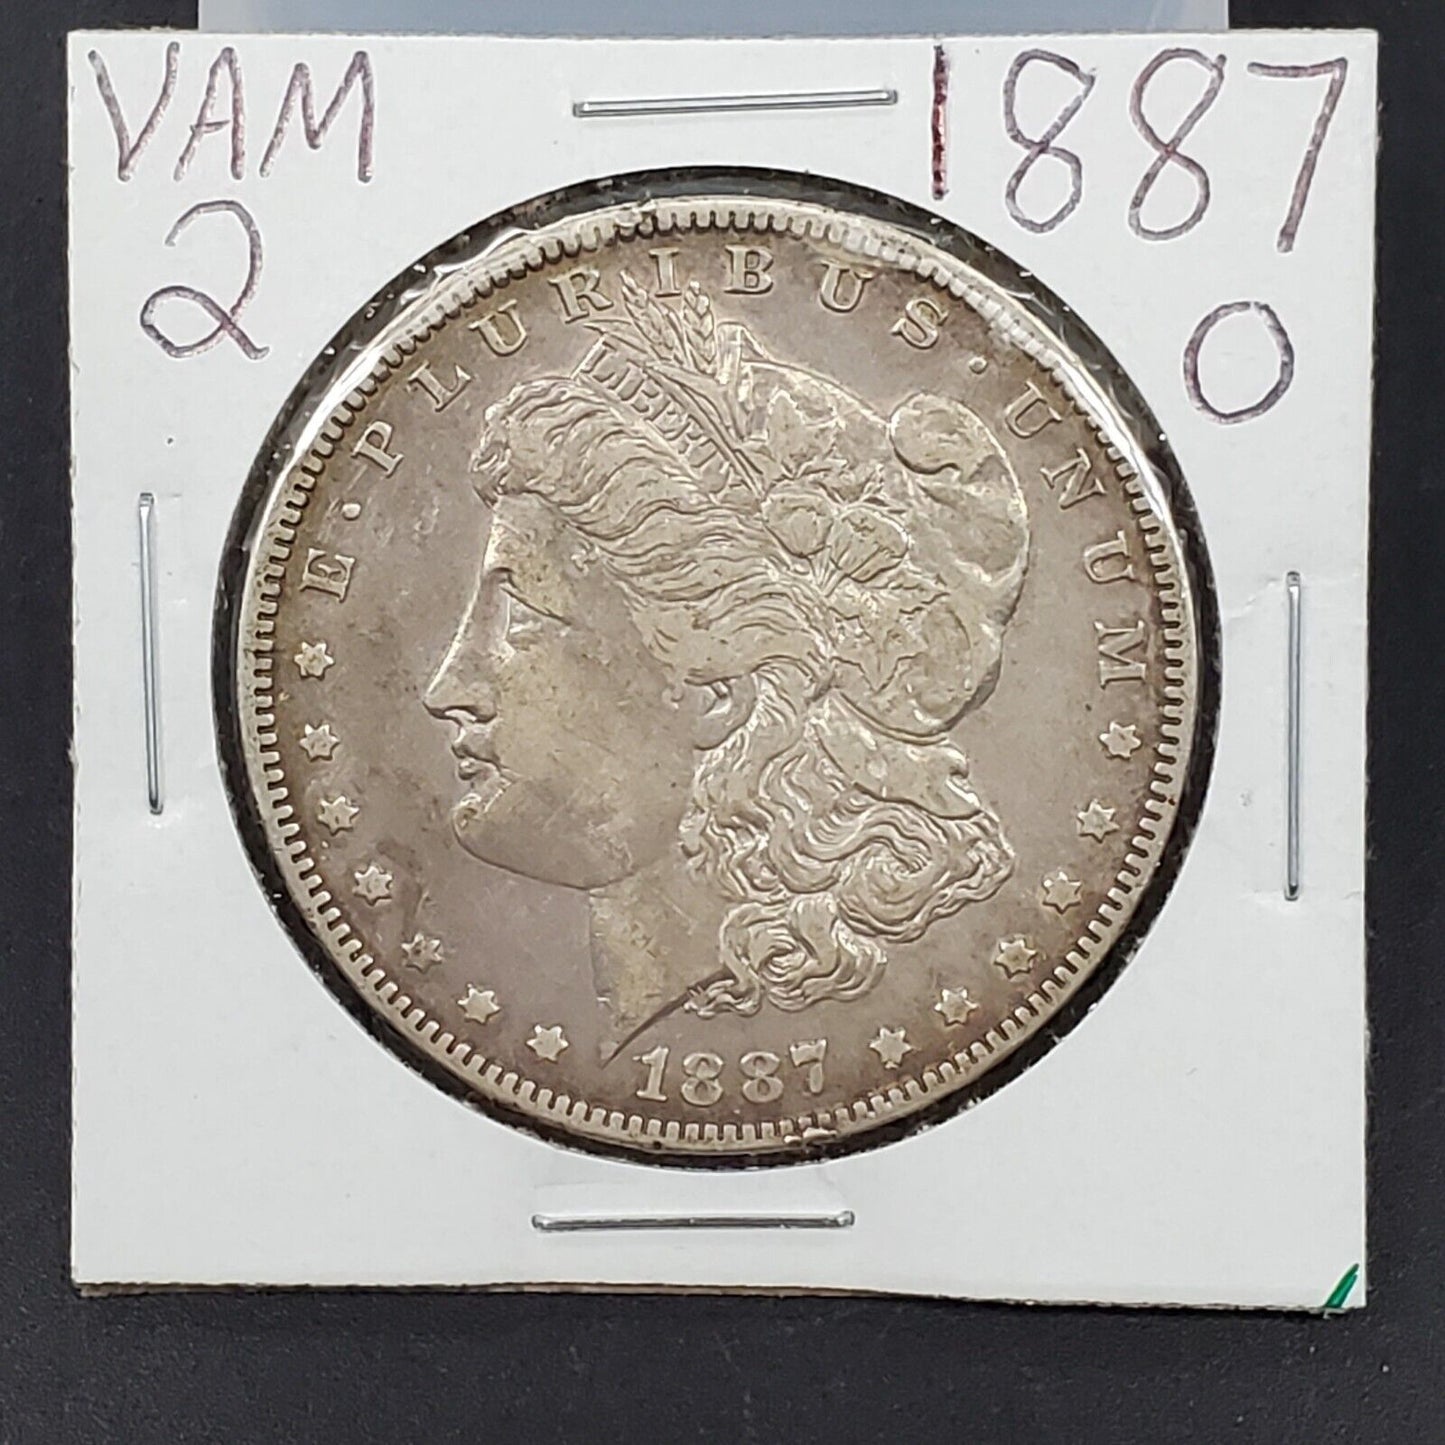 1887 O $1 Morgan Silver Dollar Coin VAM 2 RPD Repunched Date DBLE 1 TPL 7 VF /XF